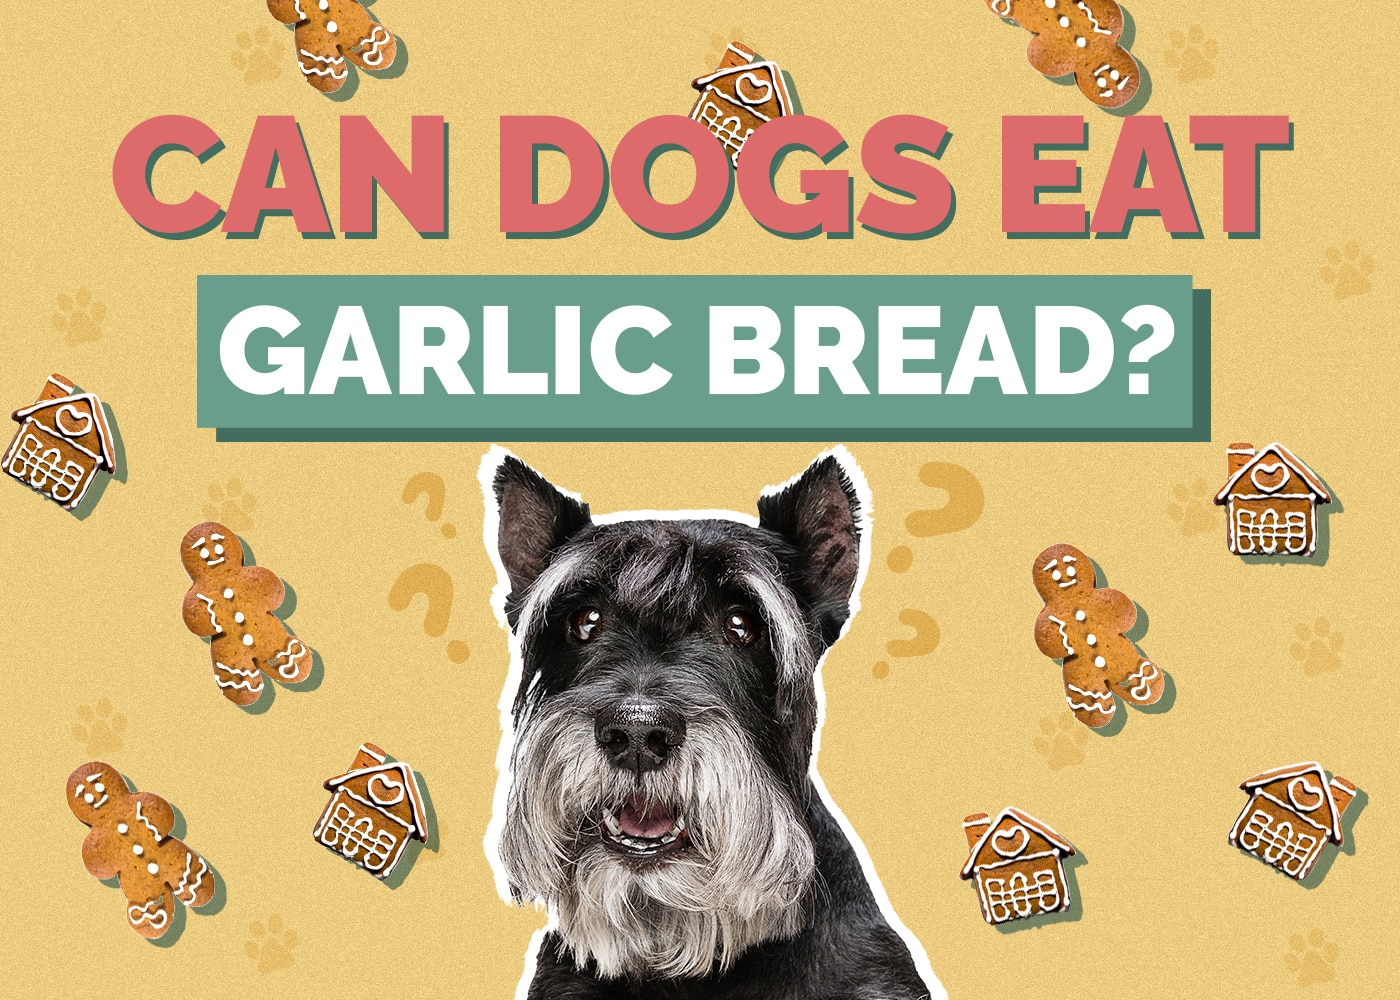 Can Dogs Eat gingerbread